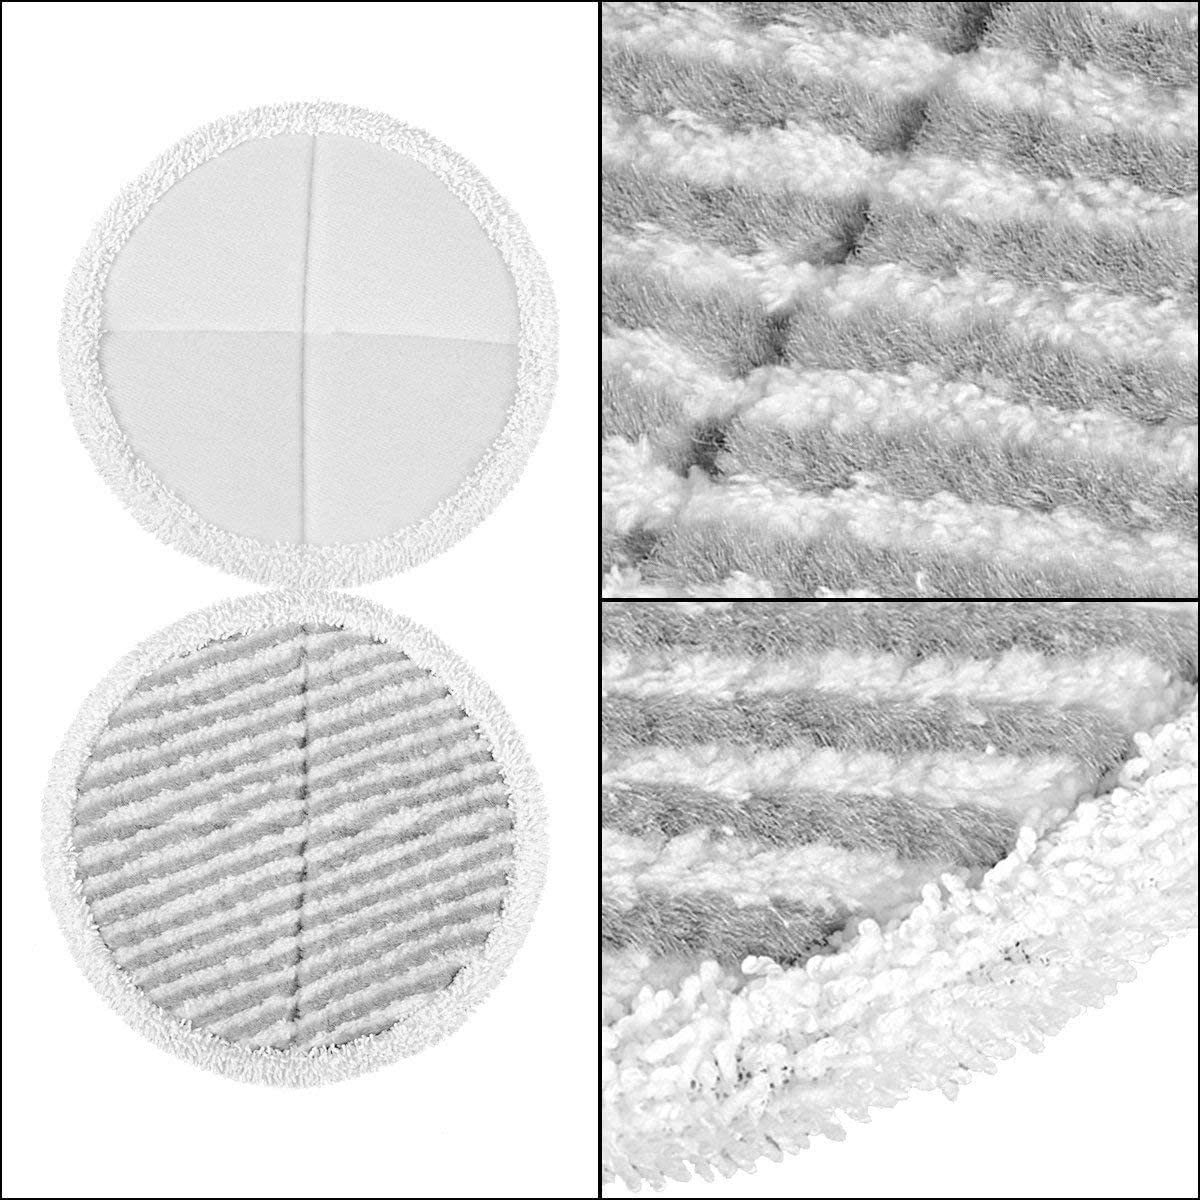 Ximoon Replacement Bissel Spinwave Mop Pads for 2039A 2039 20391 20395 2307 2315A 2039Q 2039T 2039W Powered Rotating Mop,Fit 1611297 & 1611298-4 Pack